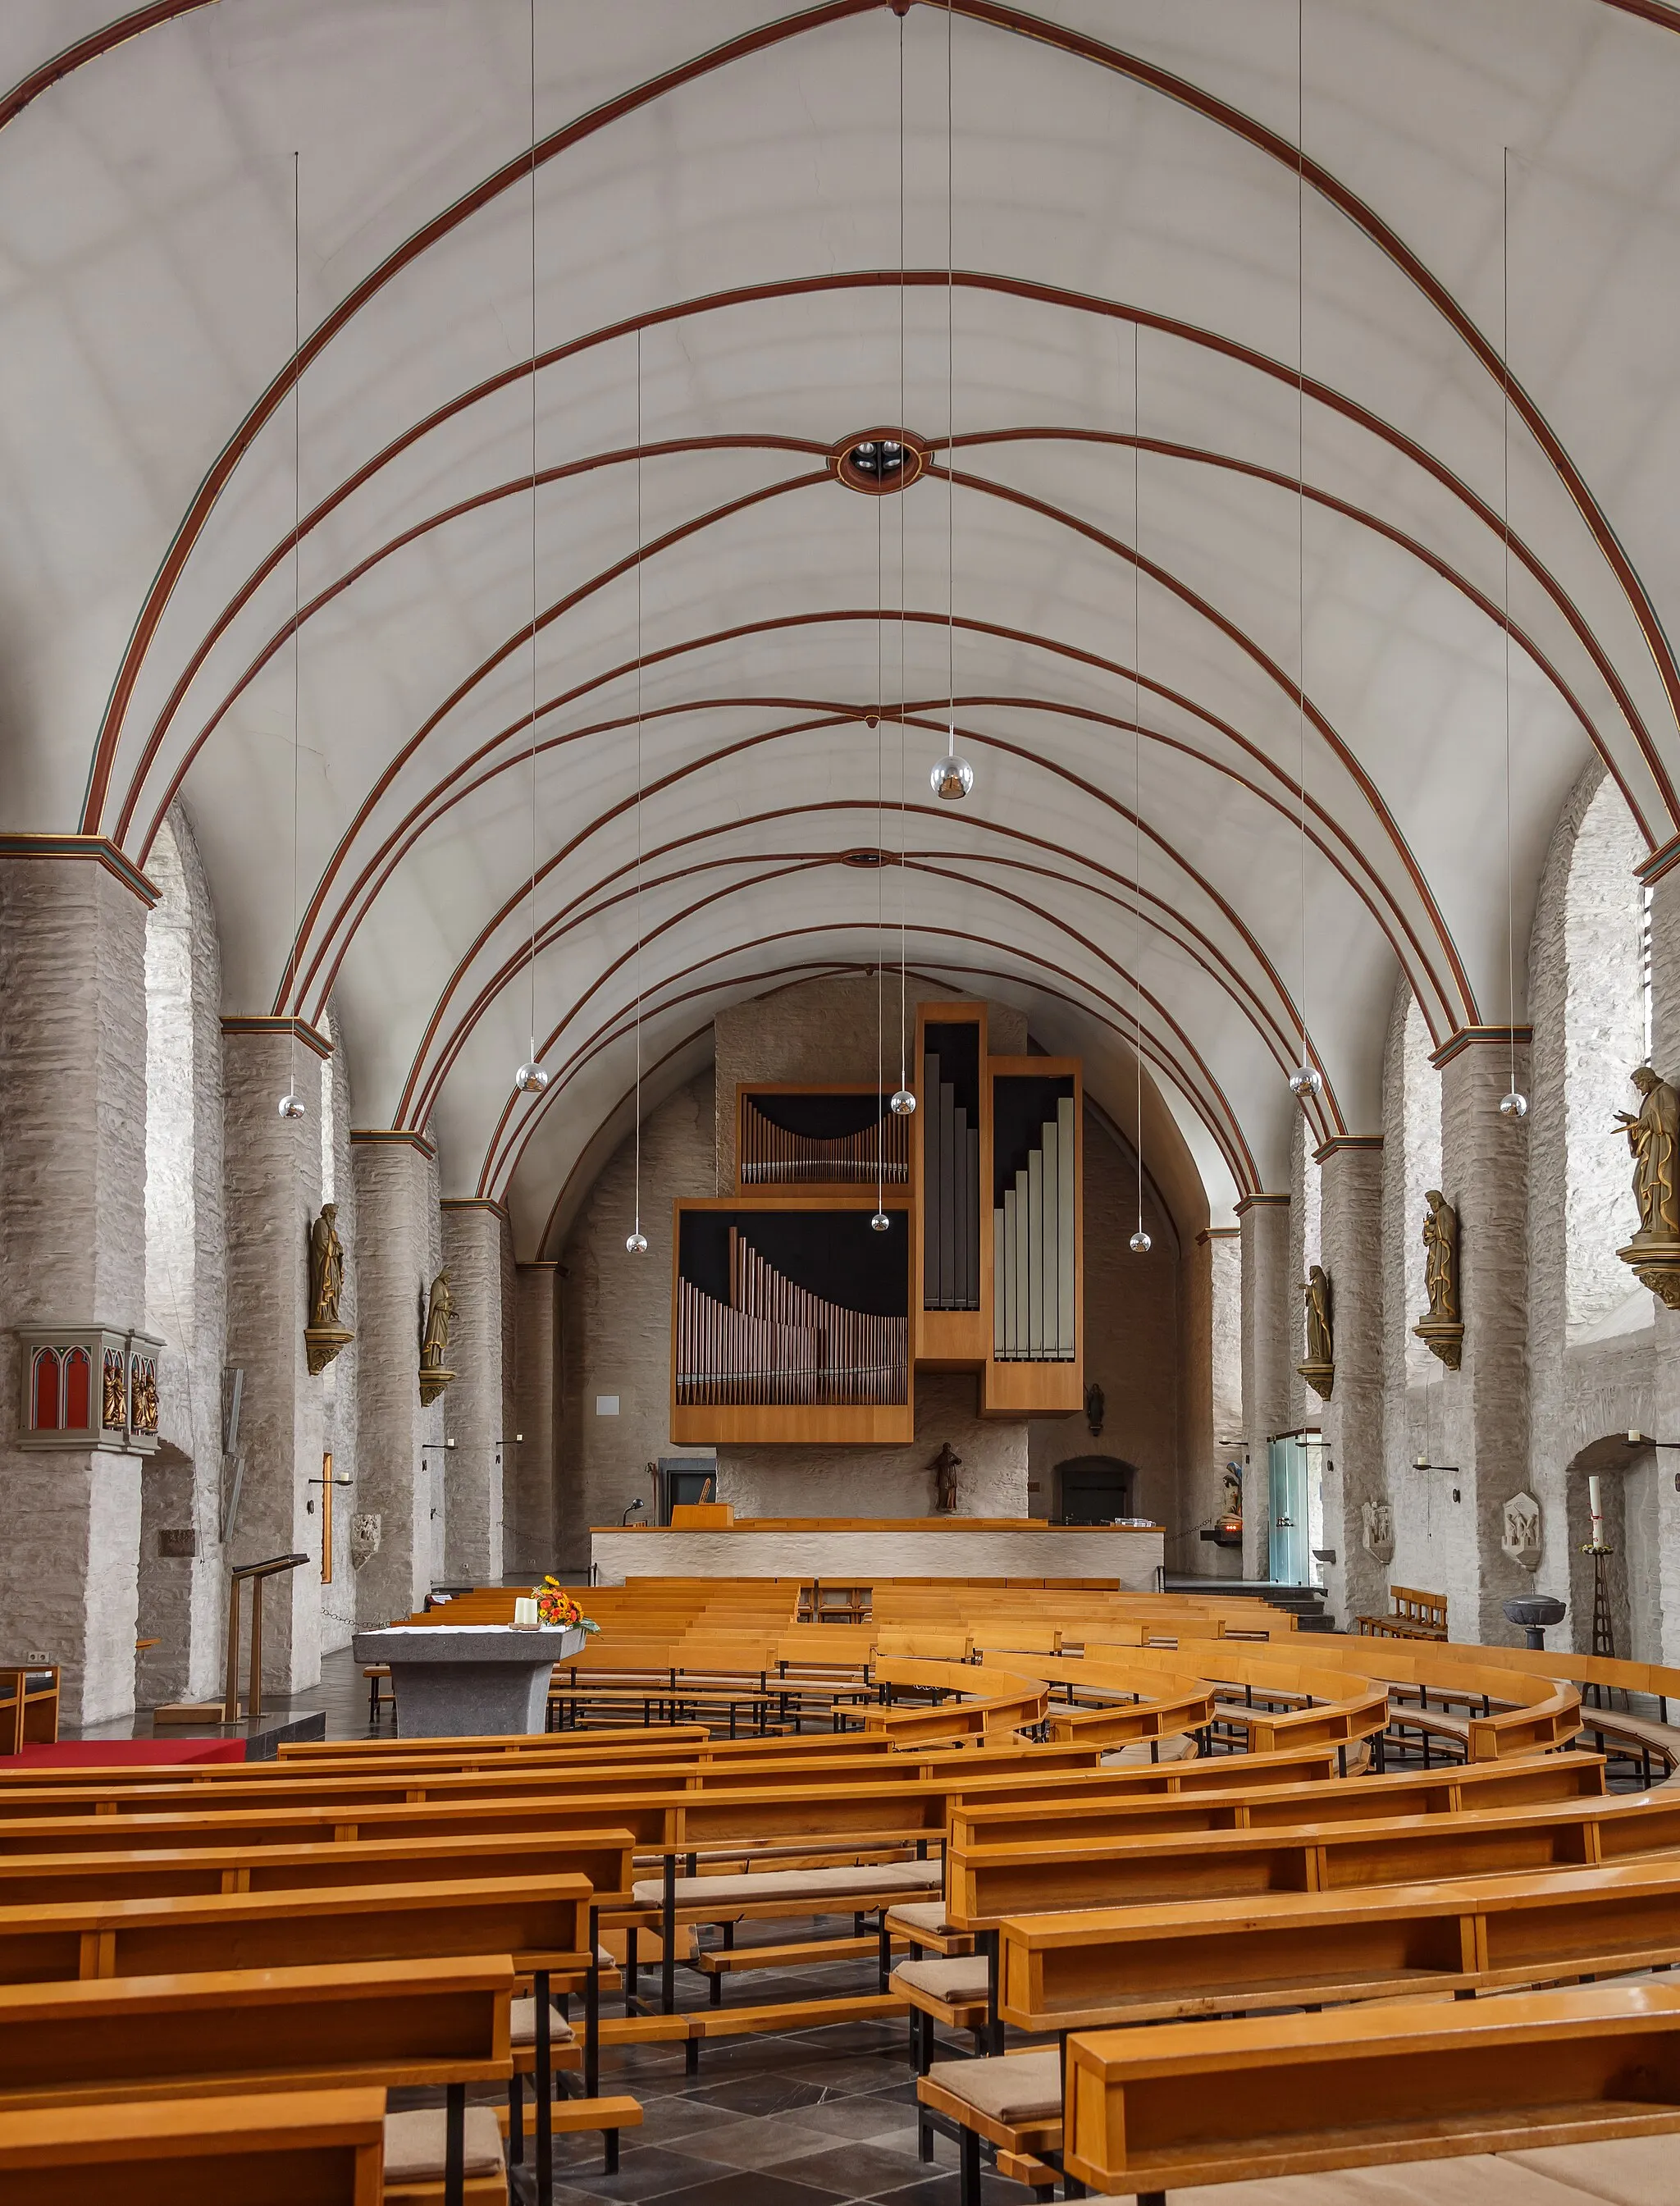 Photo showing: Monschau, Germany: Inside view of catholic church St Mariä Empfängnis with the Stahlhuth organ from 1865. In 1969 two registers of the second manual keyboard were changed, and Ursula Legge-Suwelack built a new box. Restored in 1996 by Orgelbau Stockmann, and was opened in November of that same year by Johannes Viehöver (organist Aken) and the church choir. With the reform of the interior of the building in 1969, the instrument was transferred from the east side to the west side of the church.